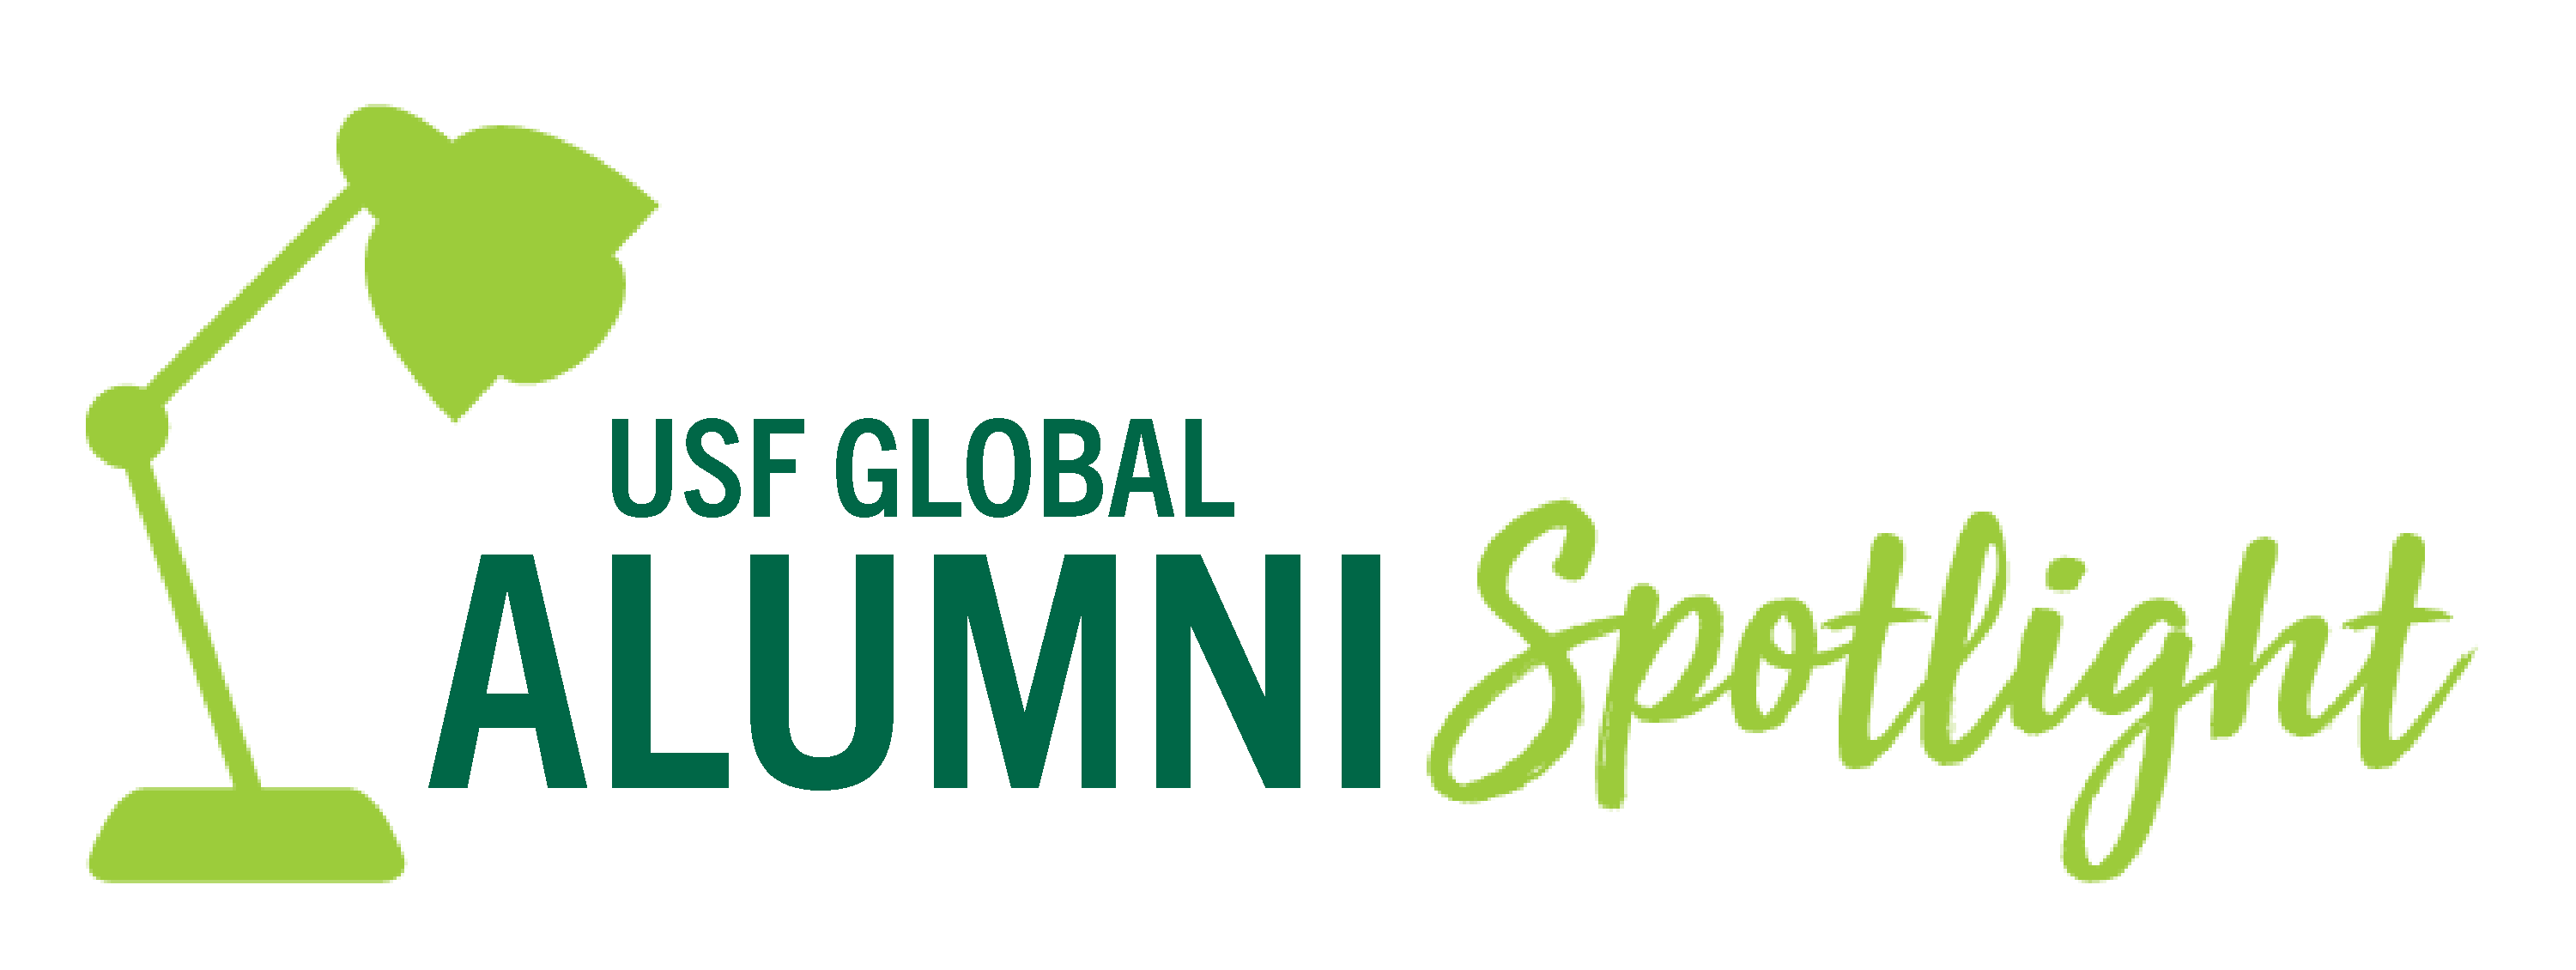 lime green spotlight lamp with the text USF global spotlight in script font